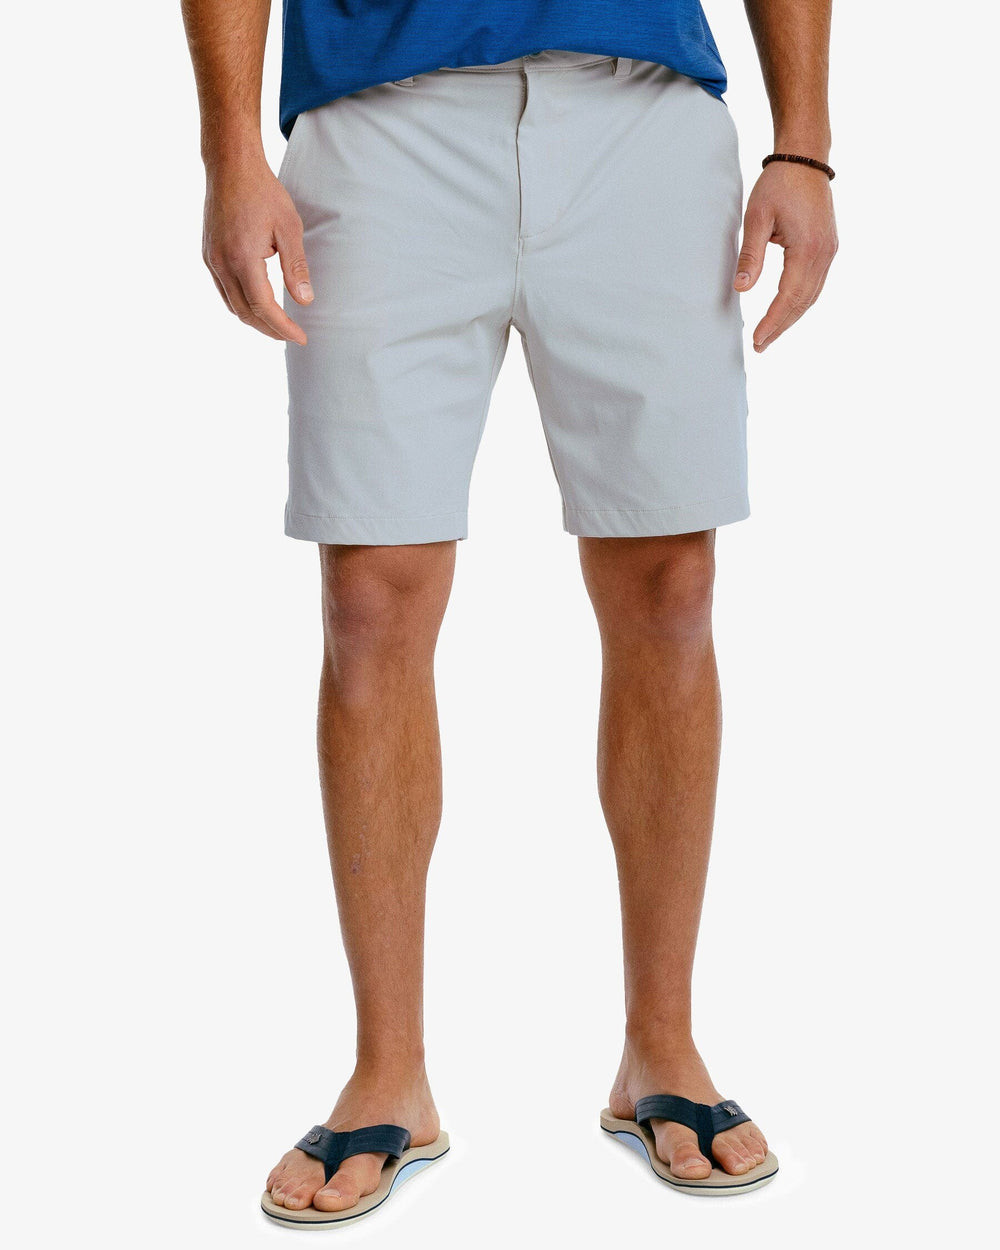 The front of the Men's Gulf 8 Inch Brrr Performance Short by Southern Tide - Seagull Grey